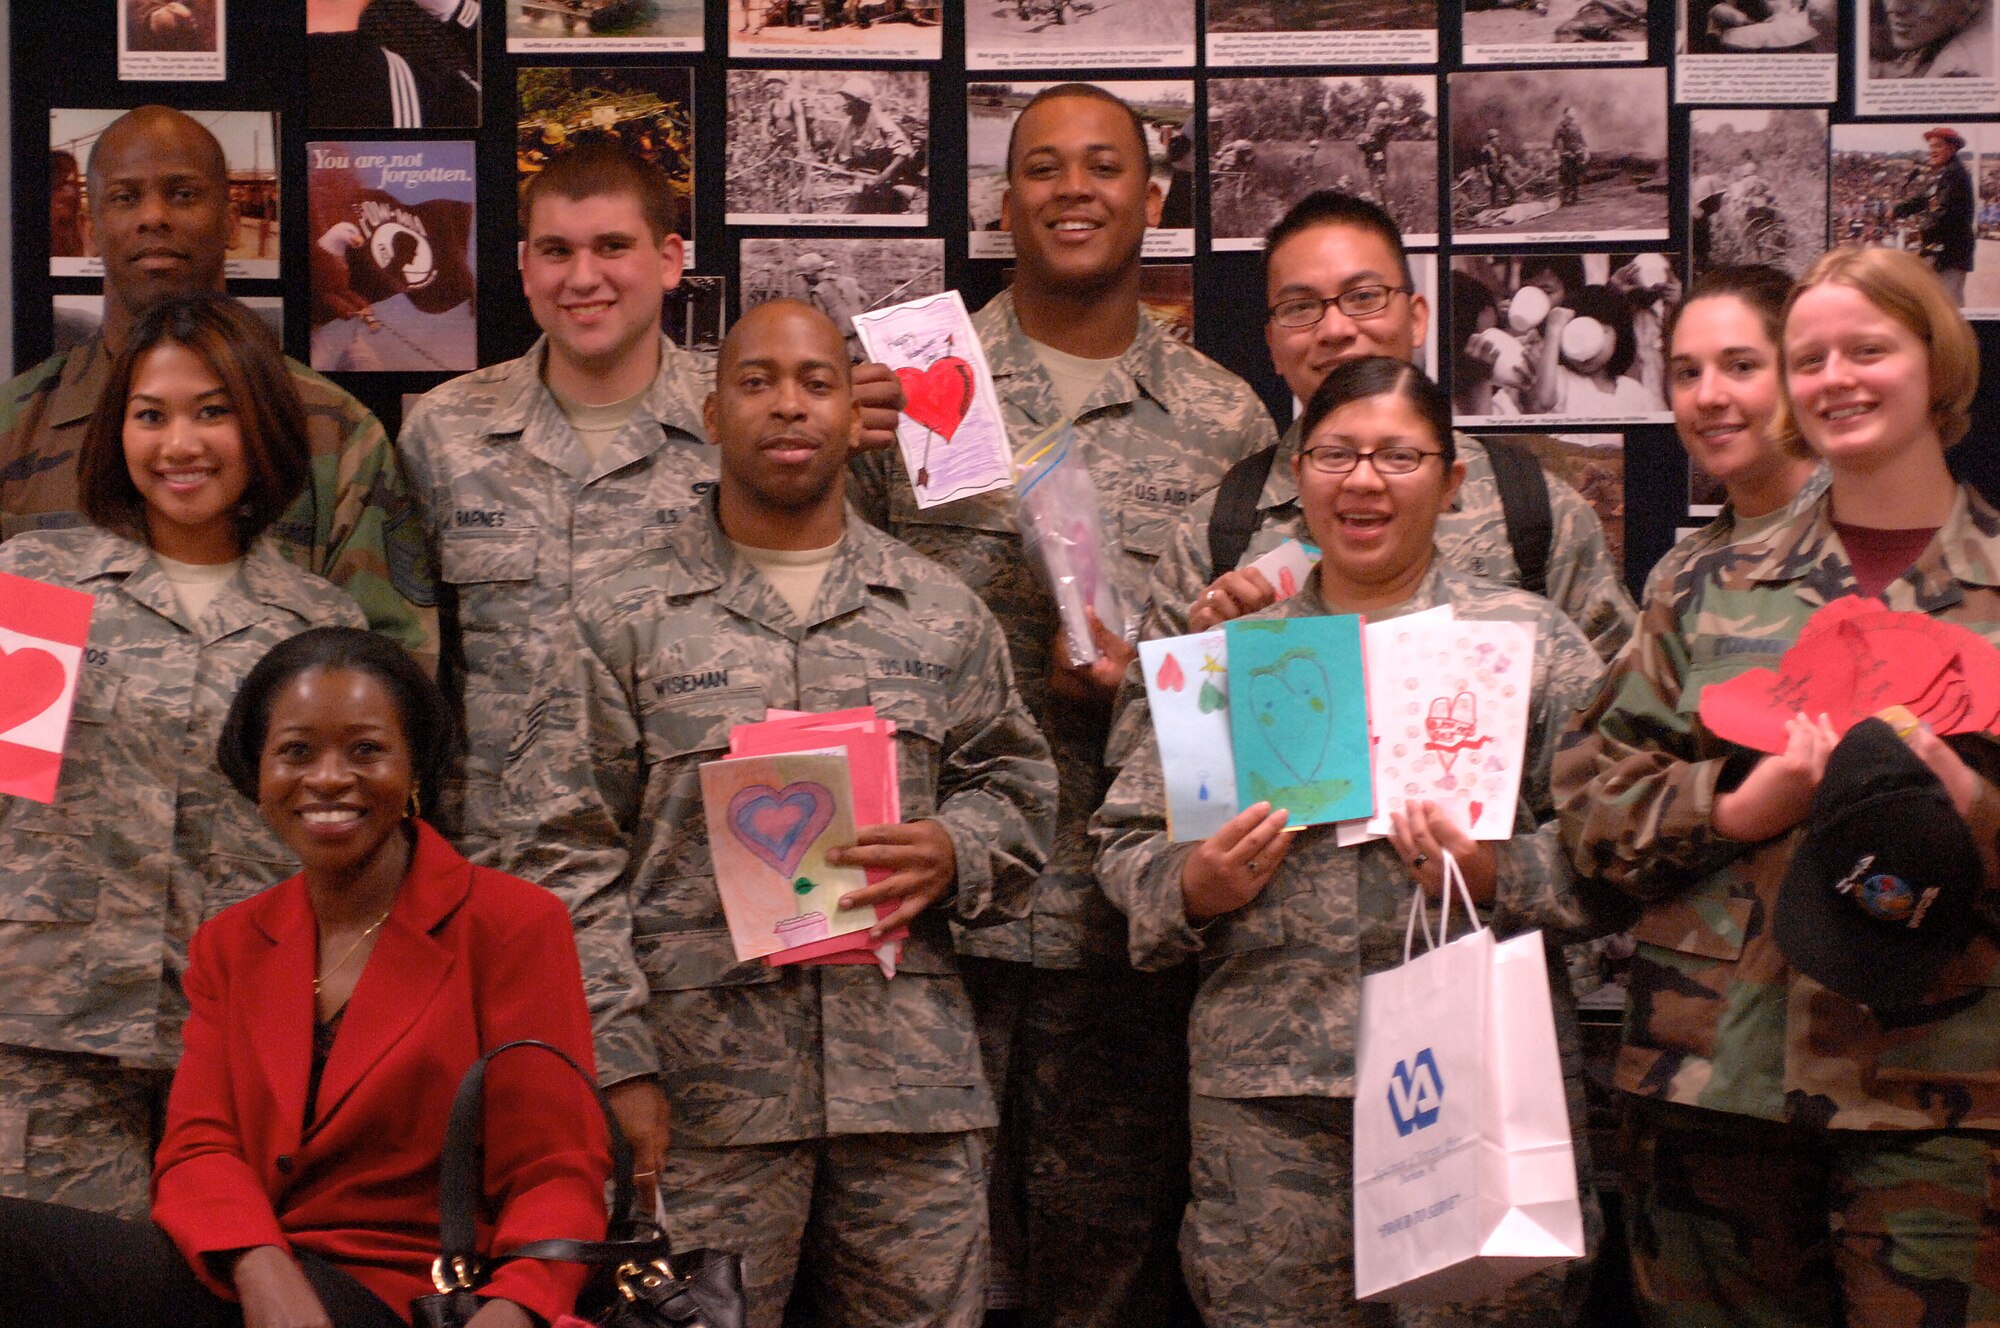 Participants of the annual Valentines for Vets visit to Durham Veterans Administration Medical Center stand in front of a collage with photos of the Korean War Feb. 13, 2009. Valentines for Vets is a volunteer event where Airmen and civilians from the base bring toiletries and valentines cards made by local children to the hospital. (U.S. Air Force photo by Airman 1st Class Marissa Tucker)